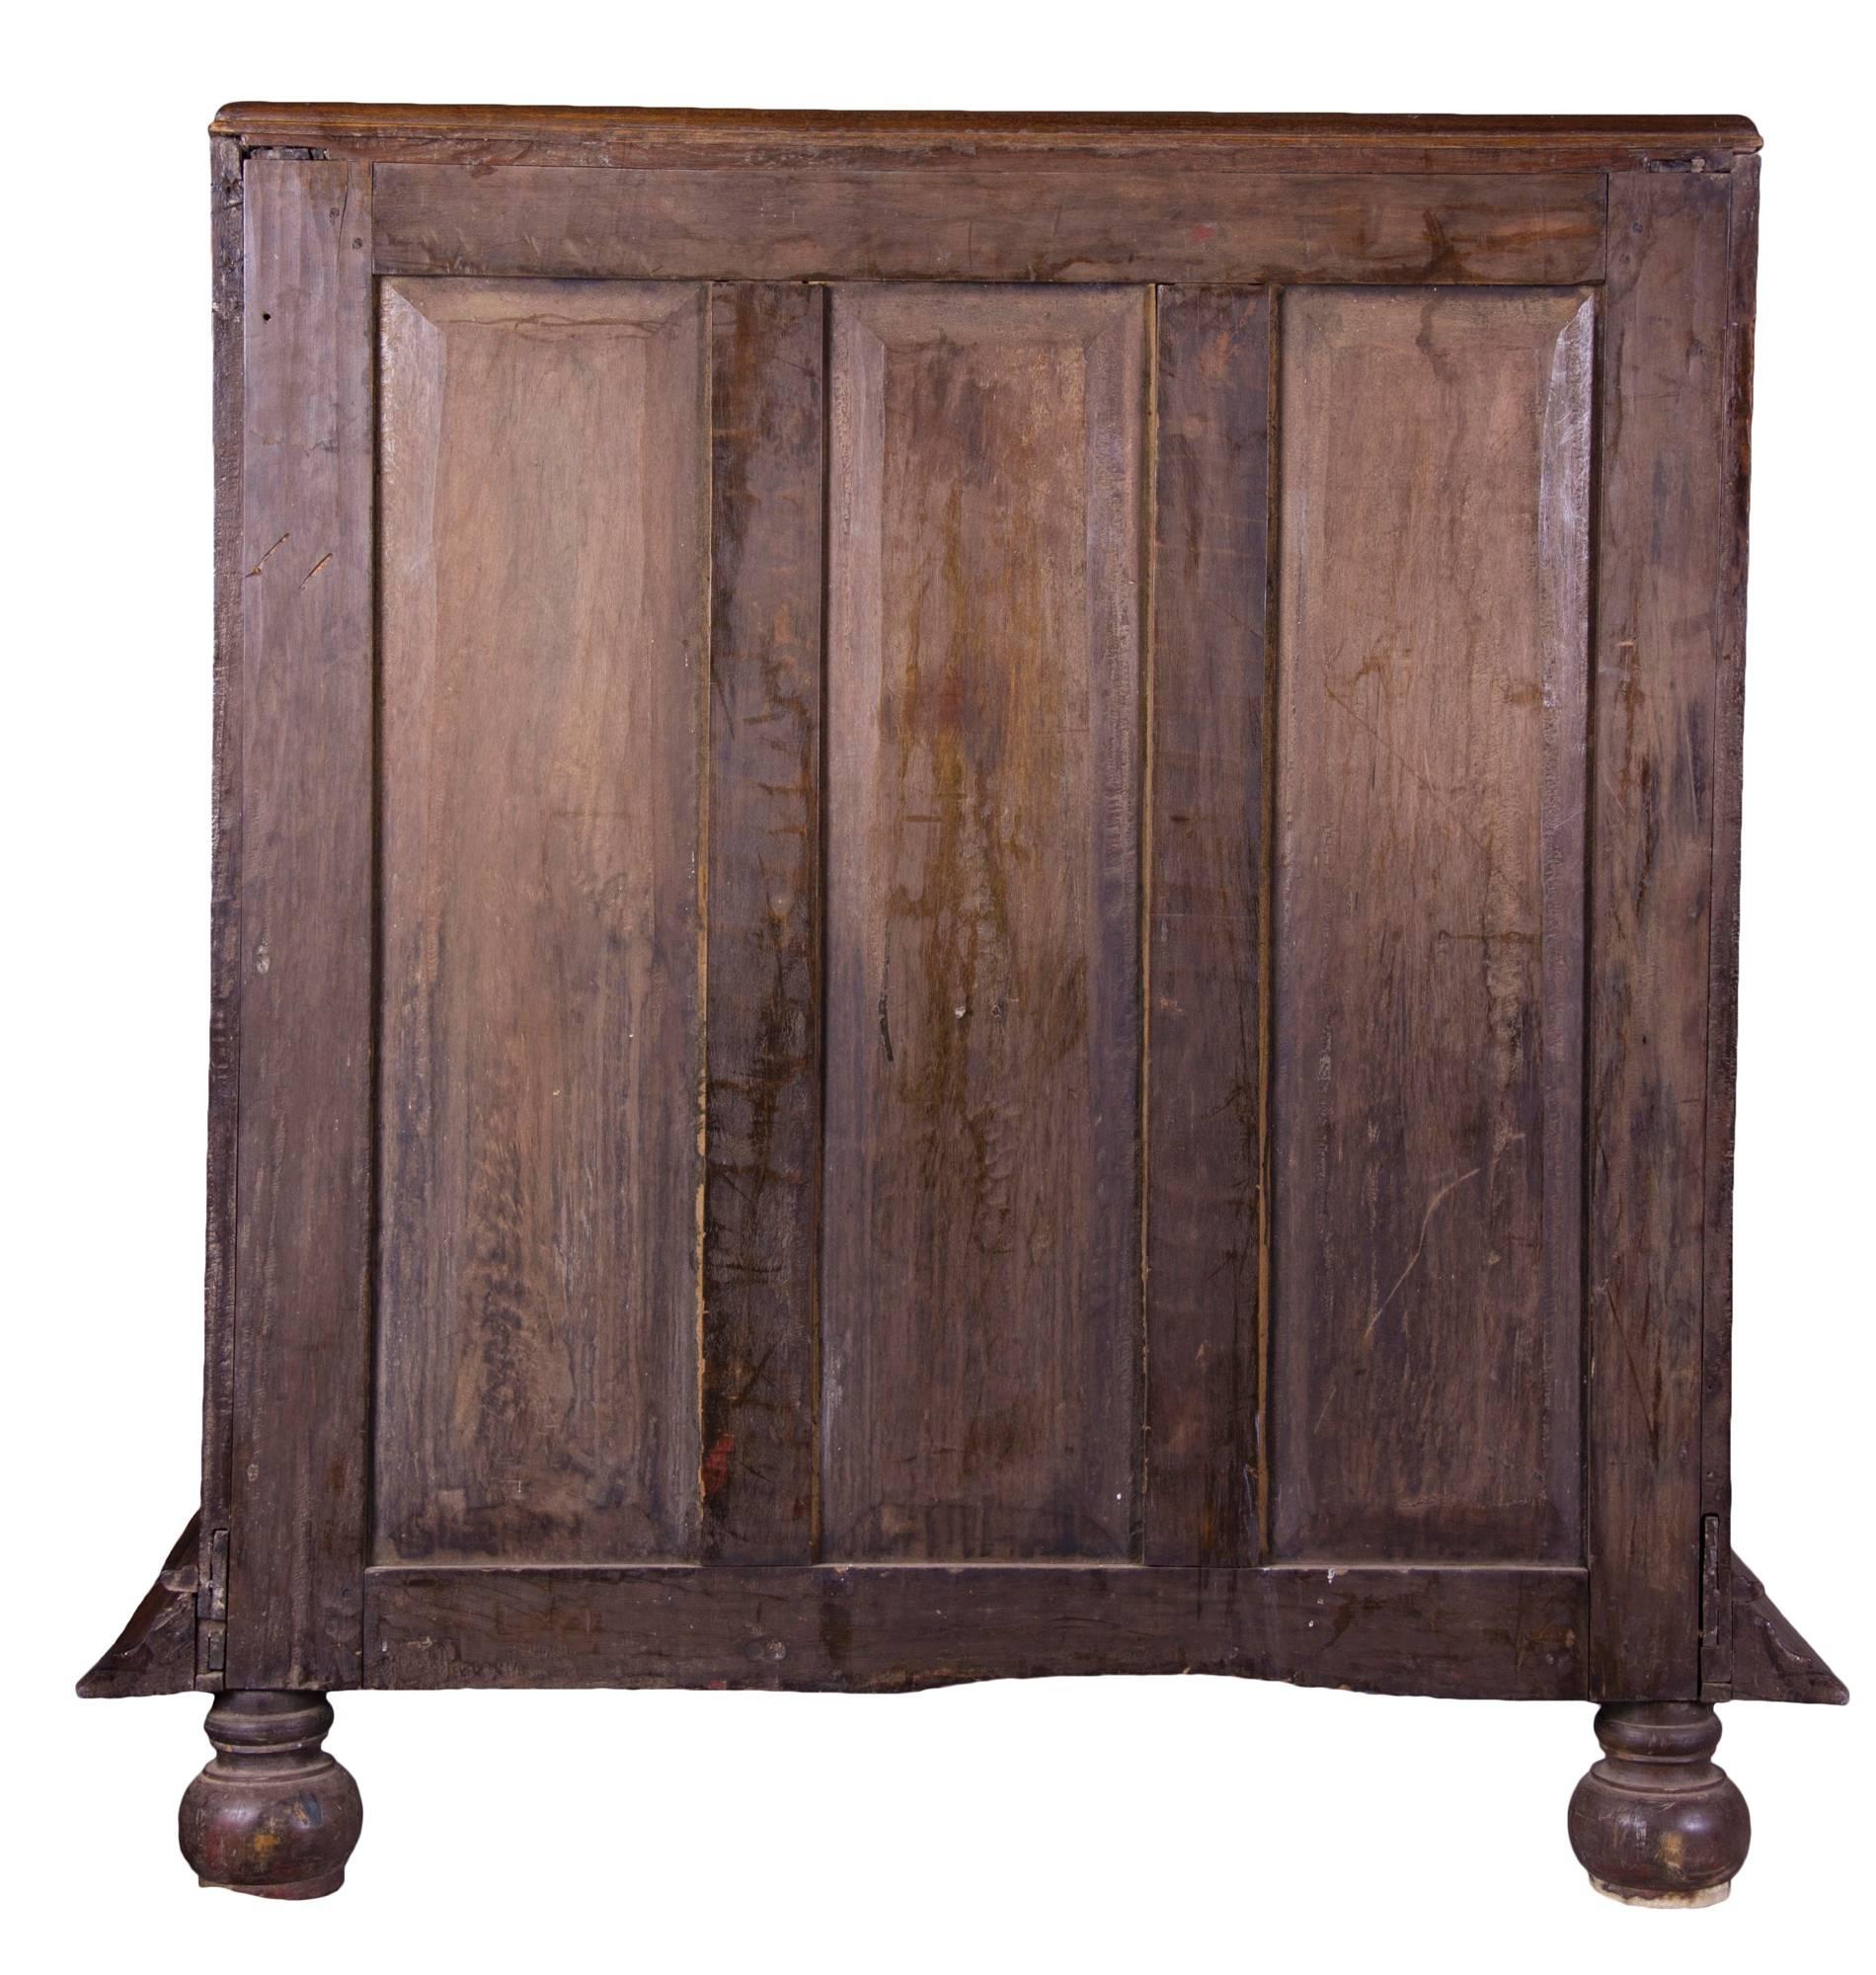 Important Paneled Block-Front Paduk Wood Fall-Front Desk, China For Sale 3